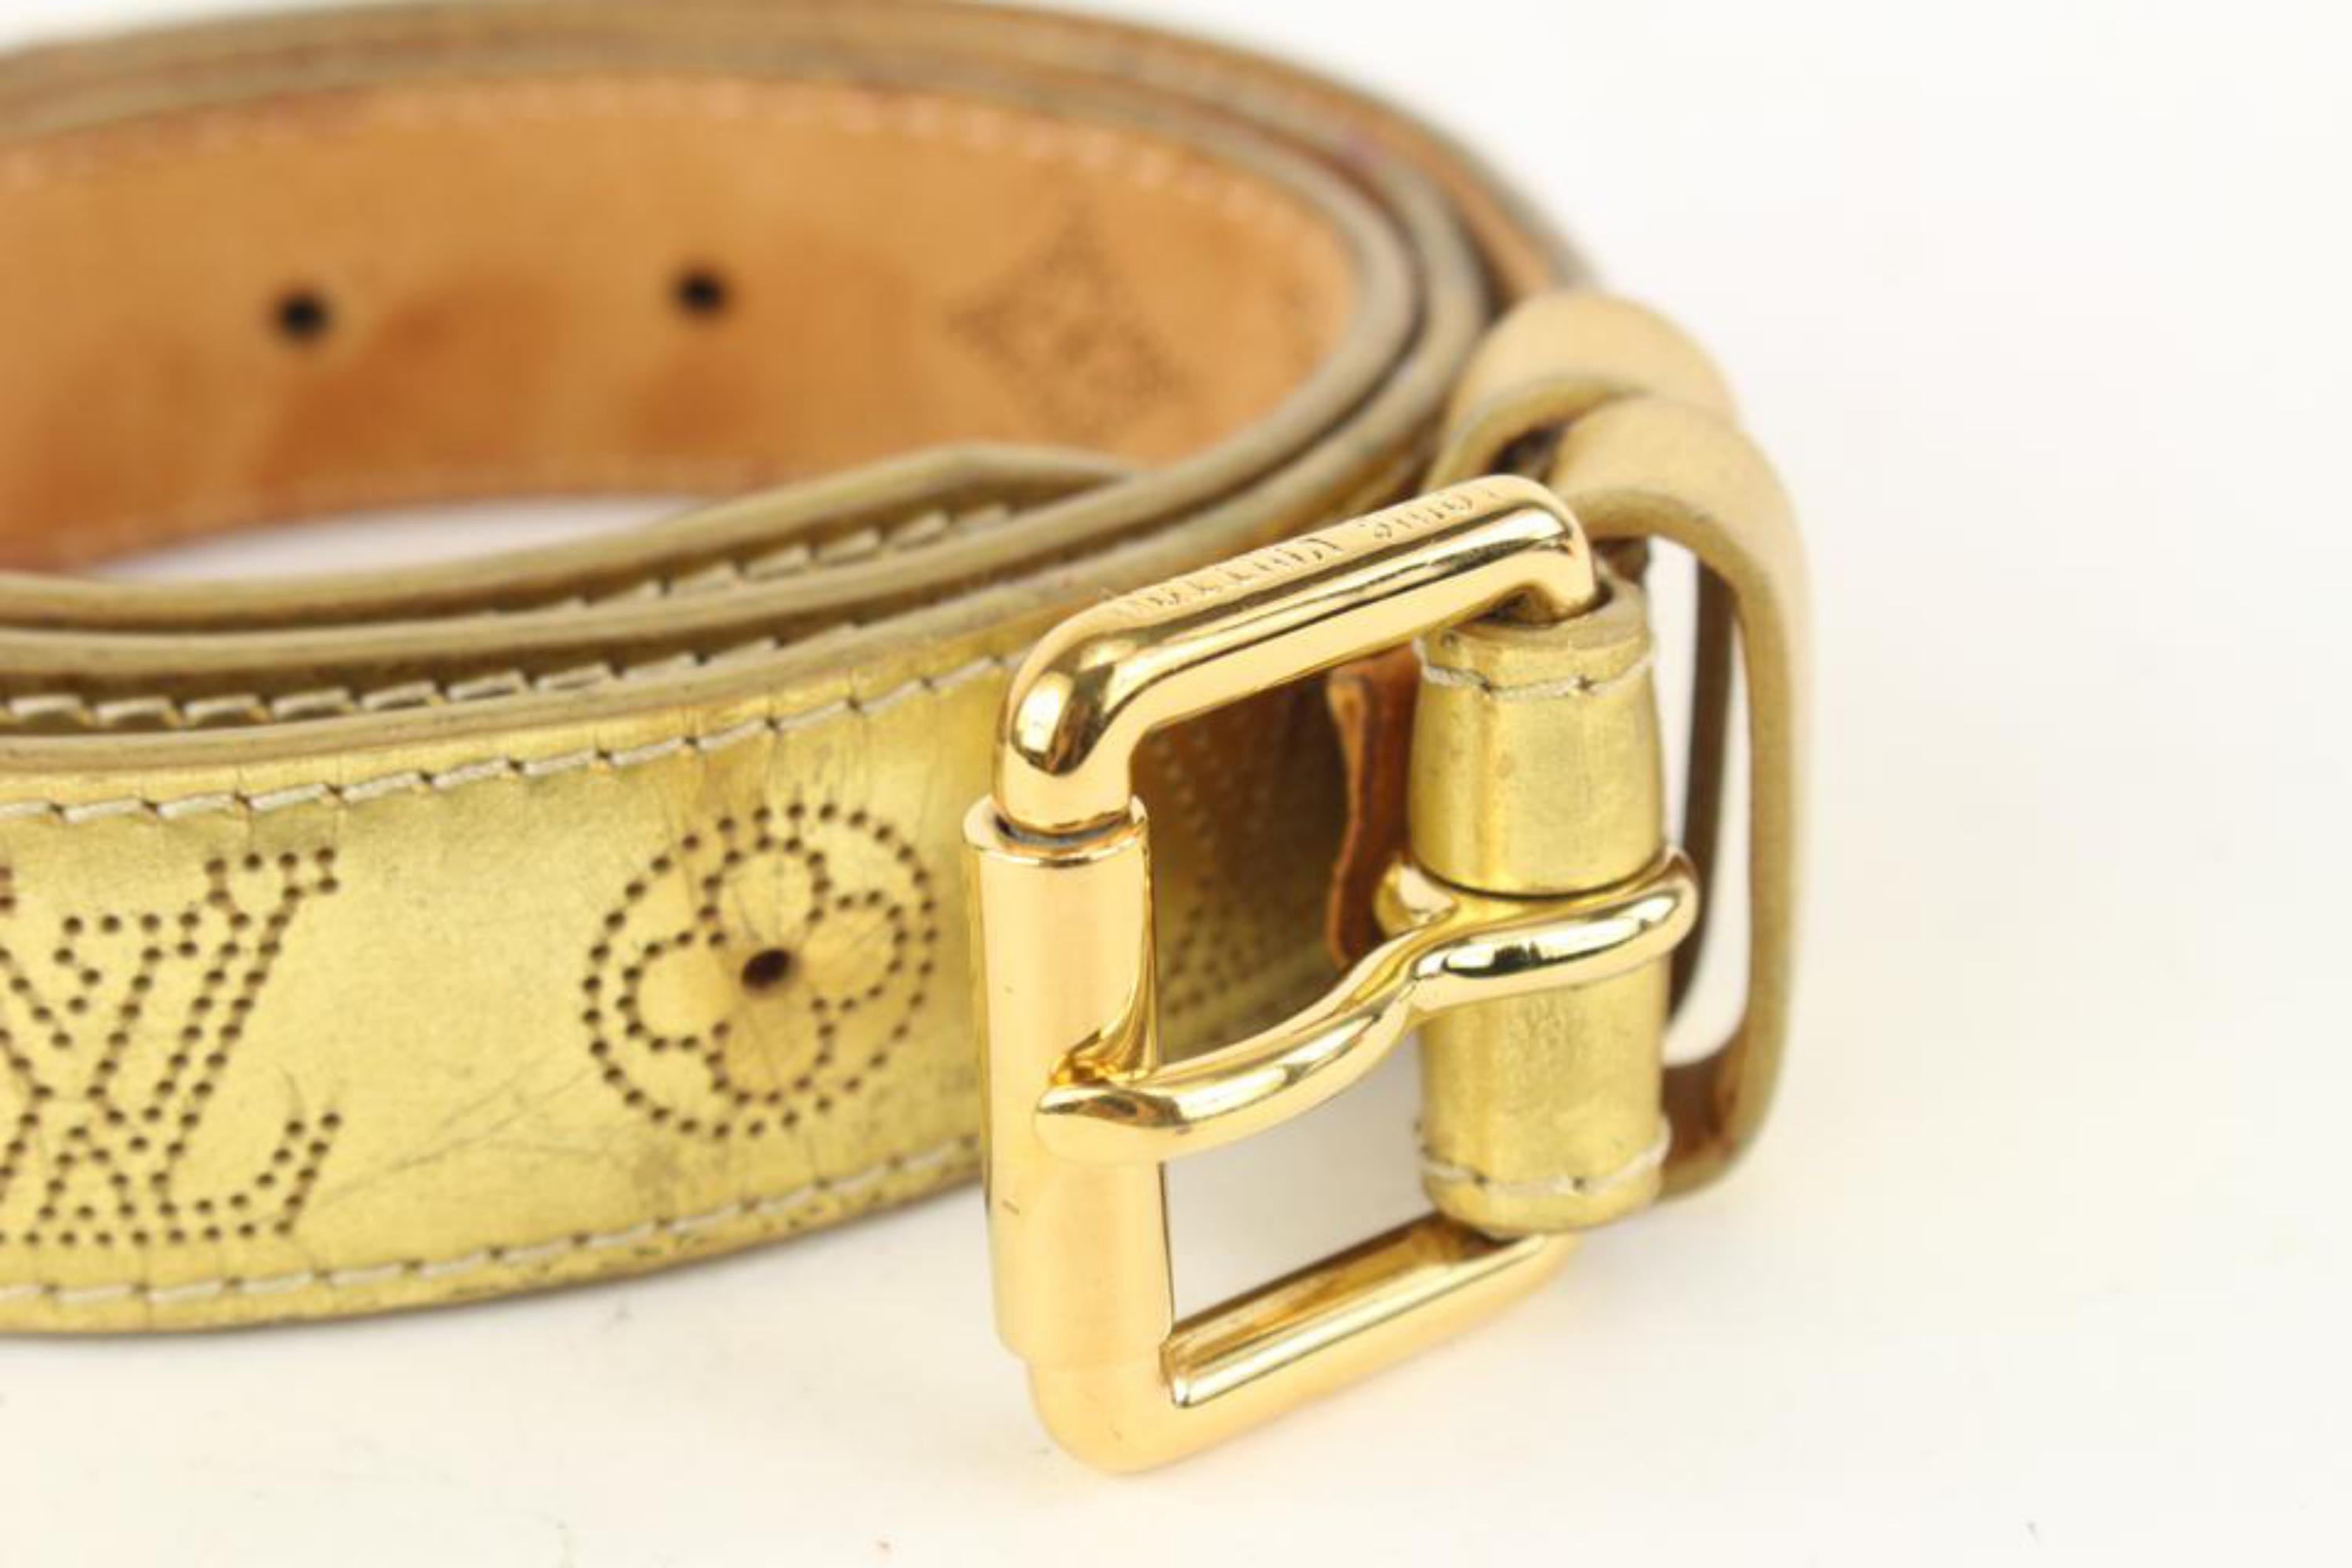 Louis Vuitton 85/34 Gold Perforated Leather Mahina Belt 927LV1 1